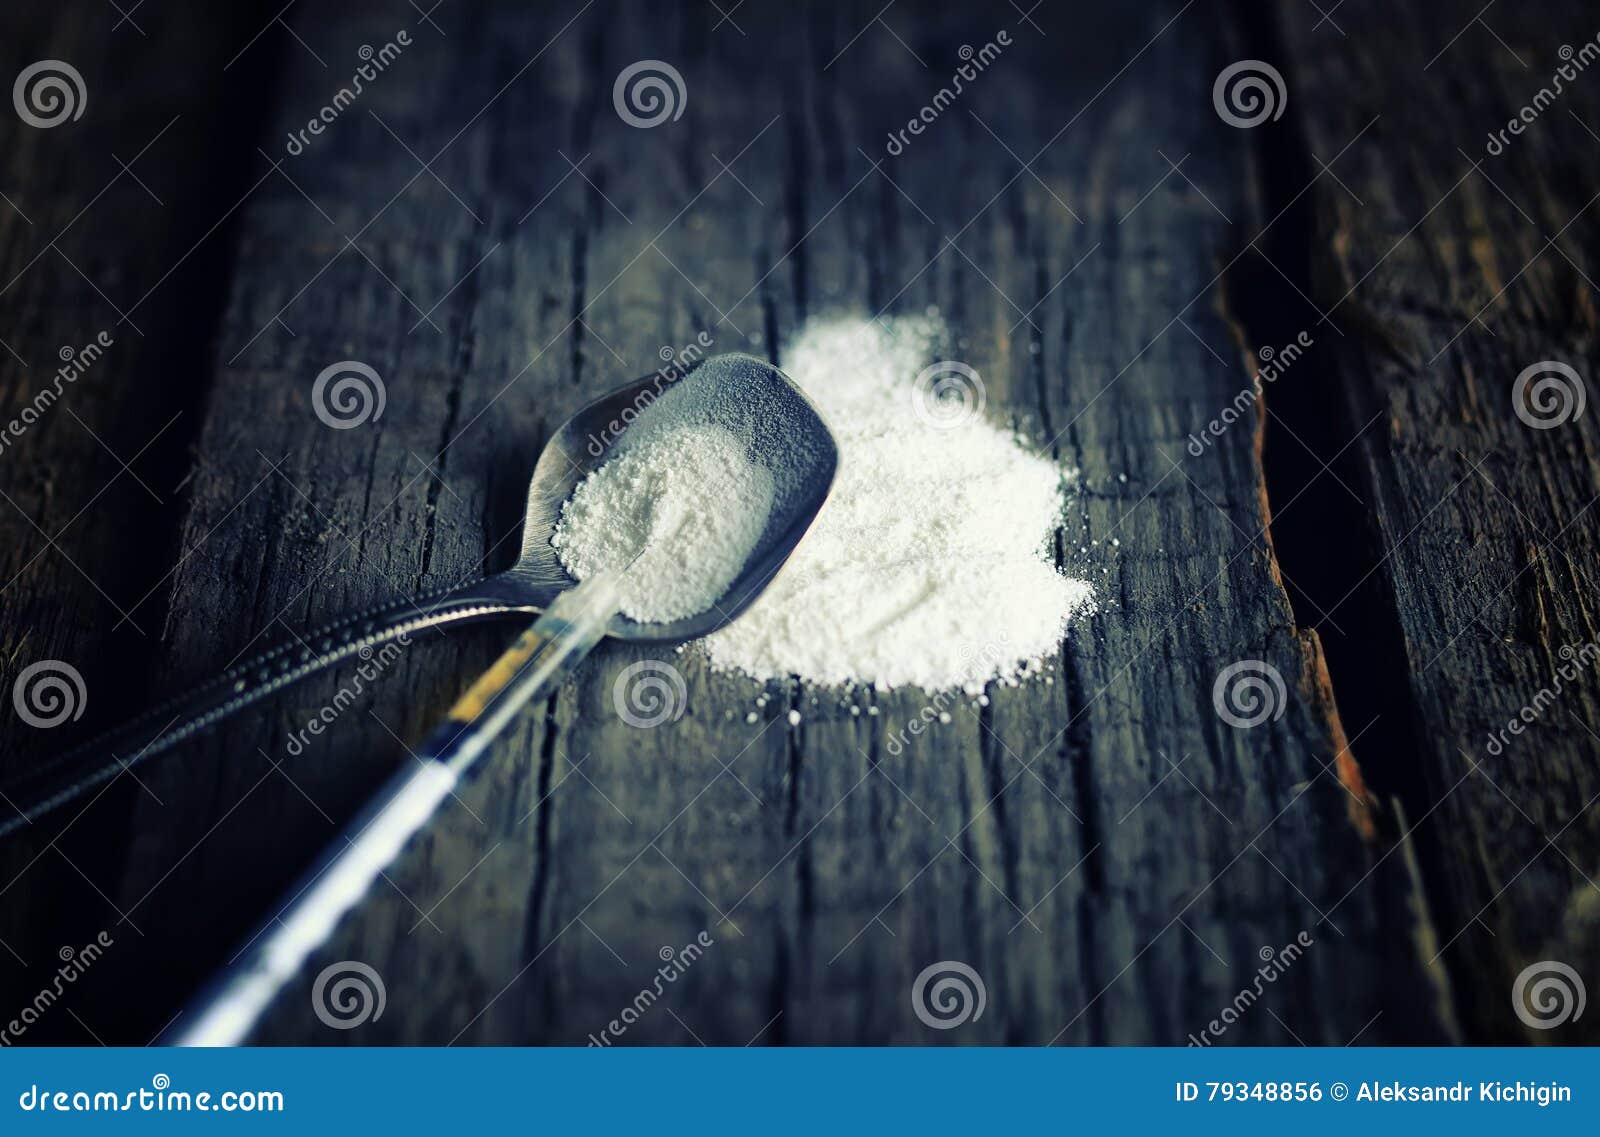 Dirty Wooden Floor with Drug Syringe Spoon Cocain Stock Photo - Image of  dangerous, medicine: 79348856